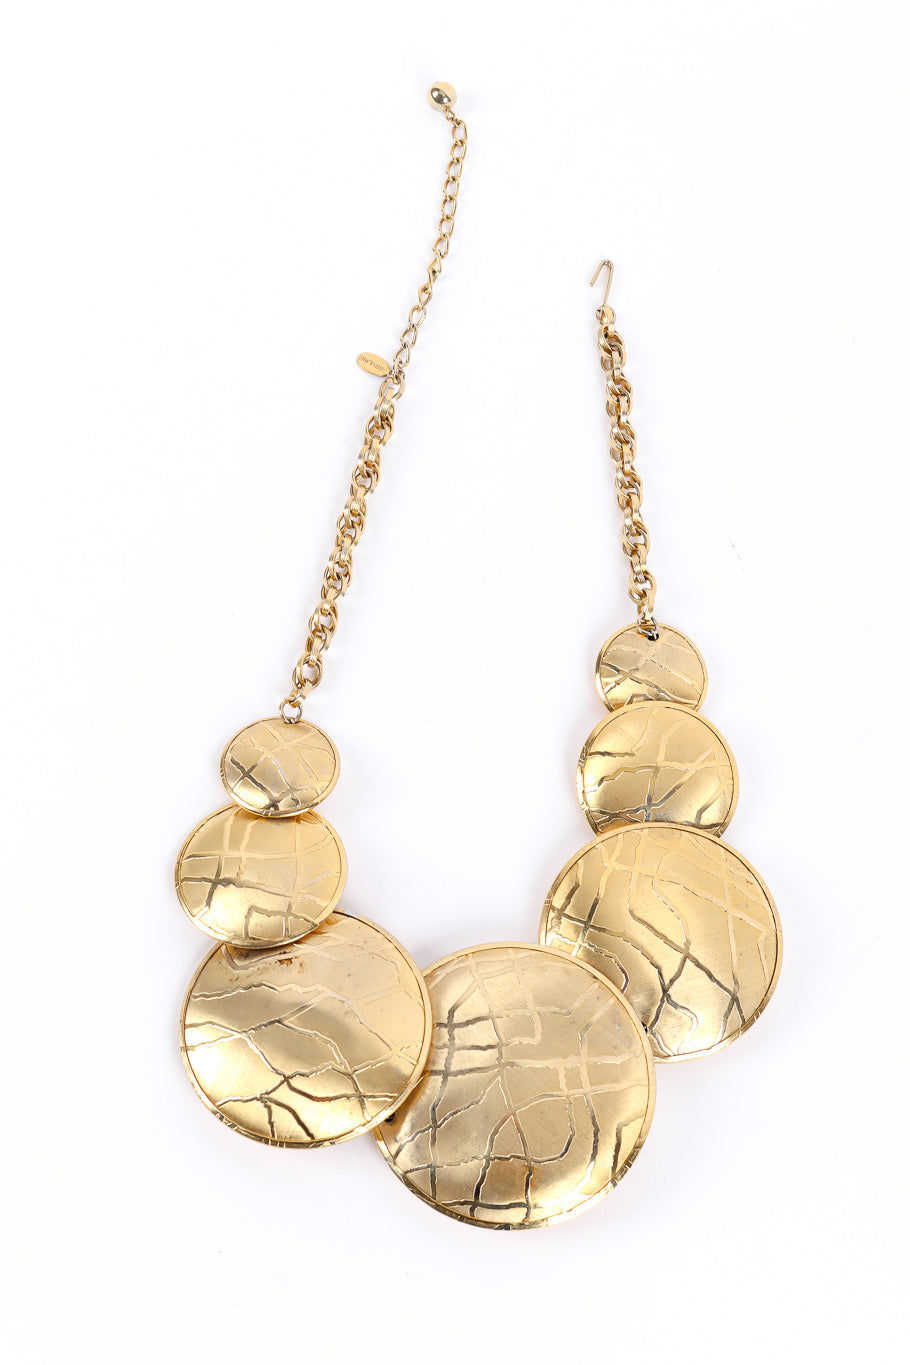 Disc necklace by Parklane flat lay on white background @recessla